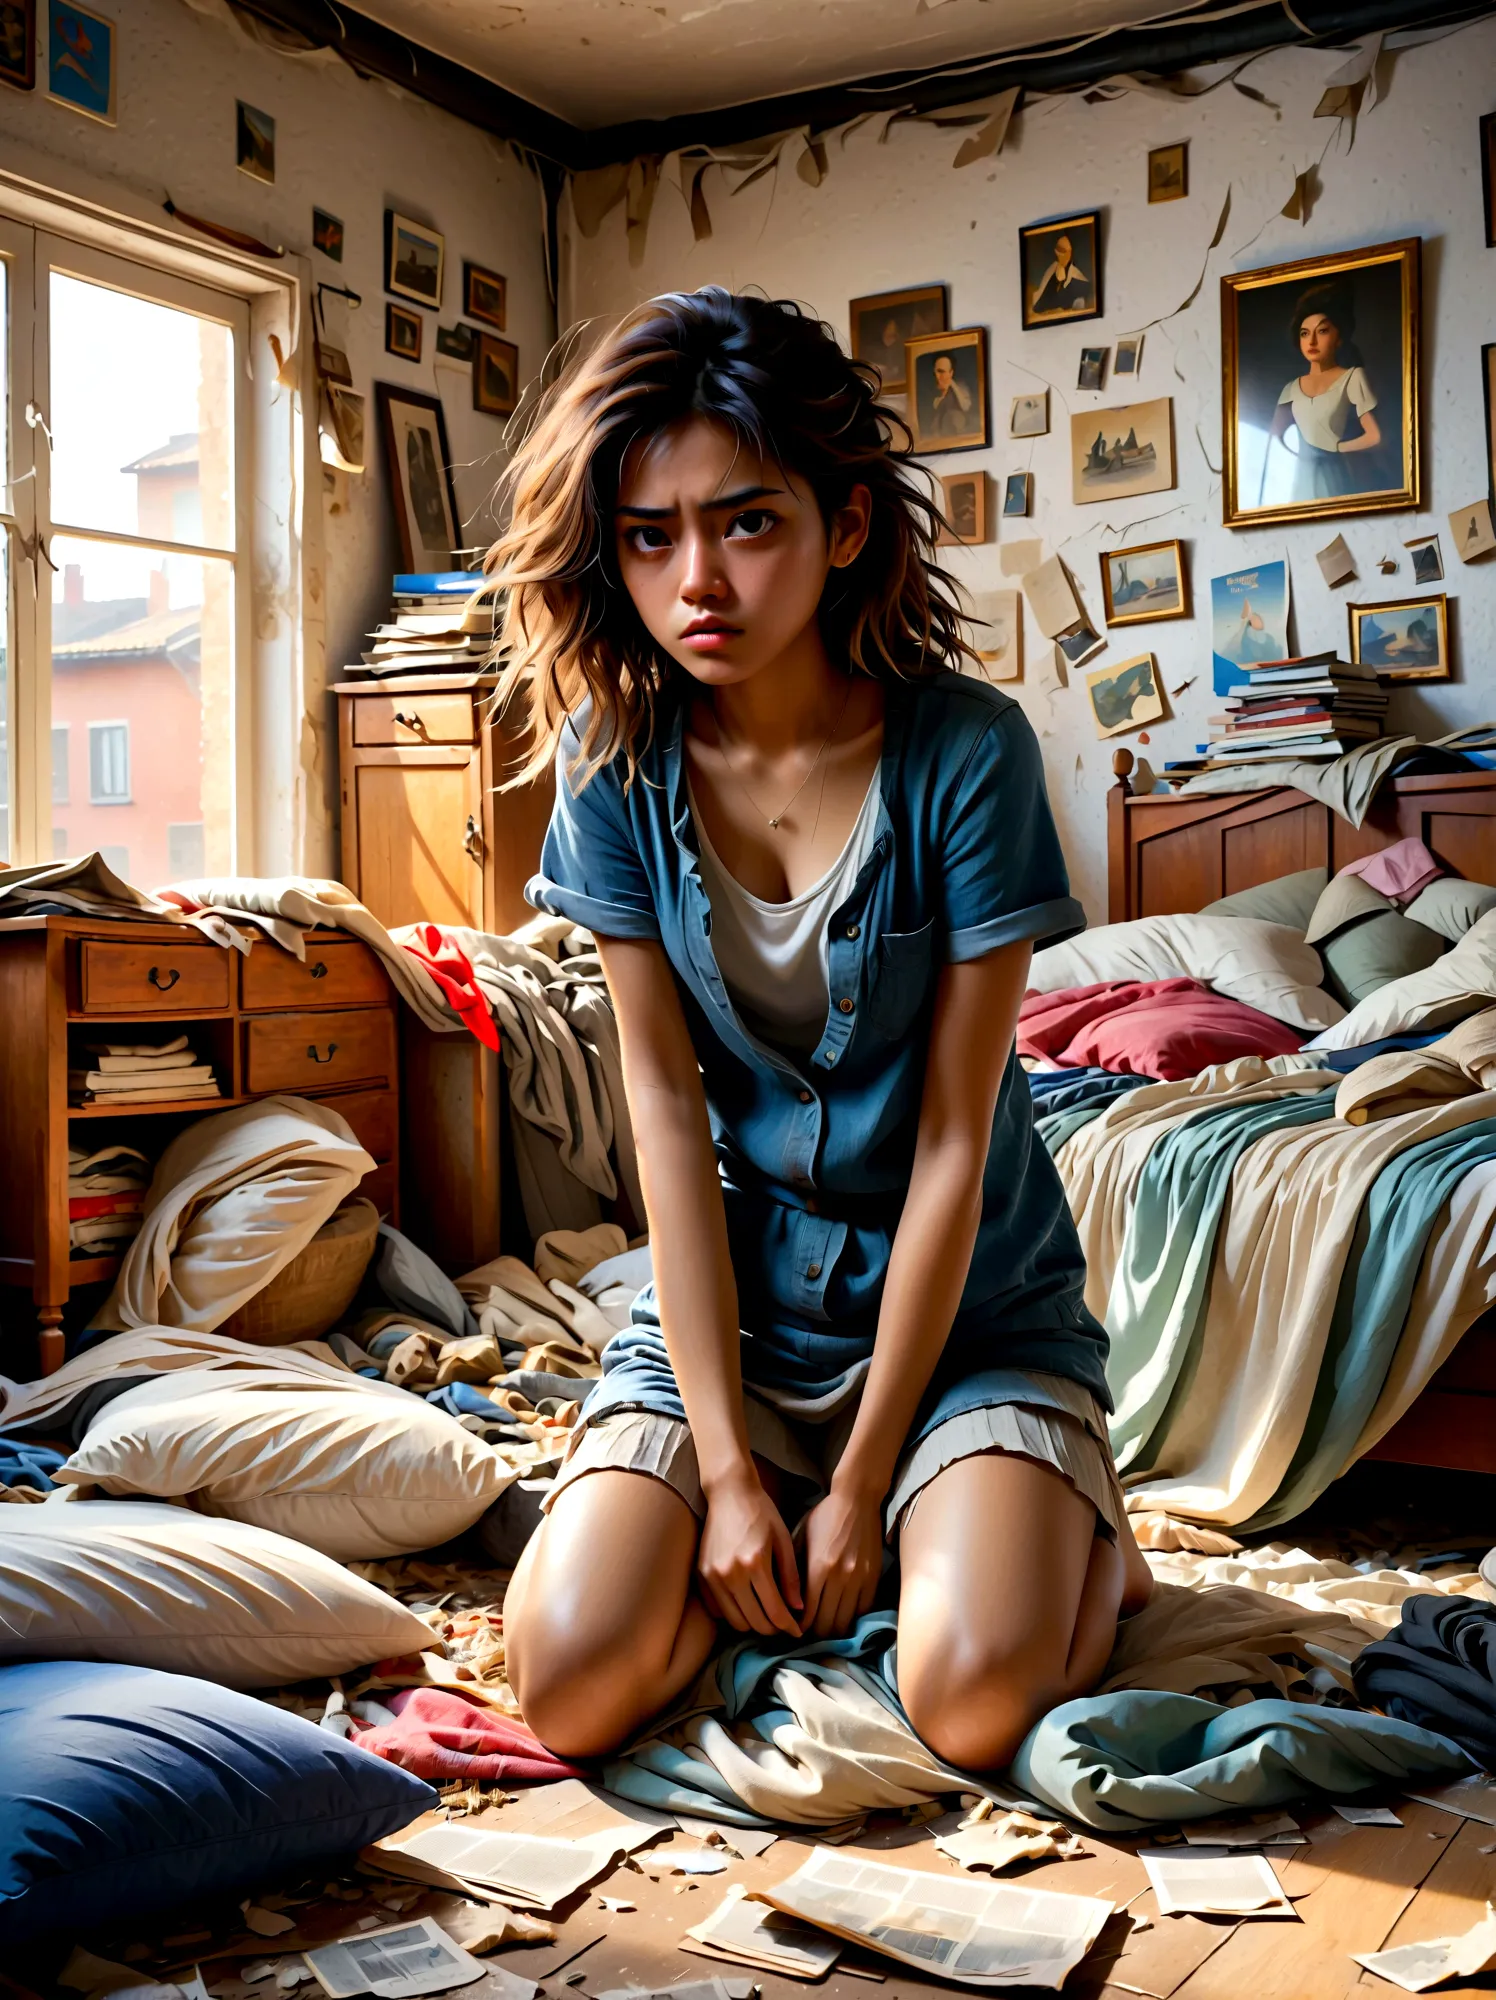 (a young girl with a disgusted expression), (Disgusted look:1.5), Messy hair, Sweating, Cleaning a messy room, dust, cobwebs, A ...